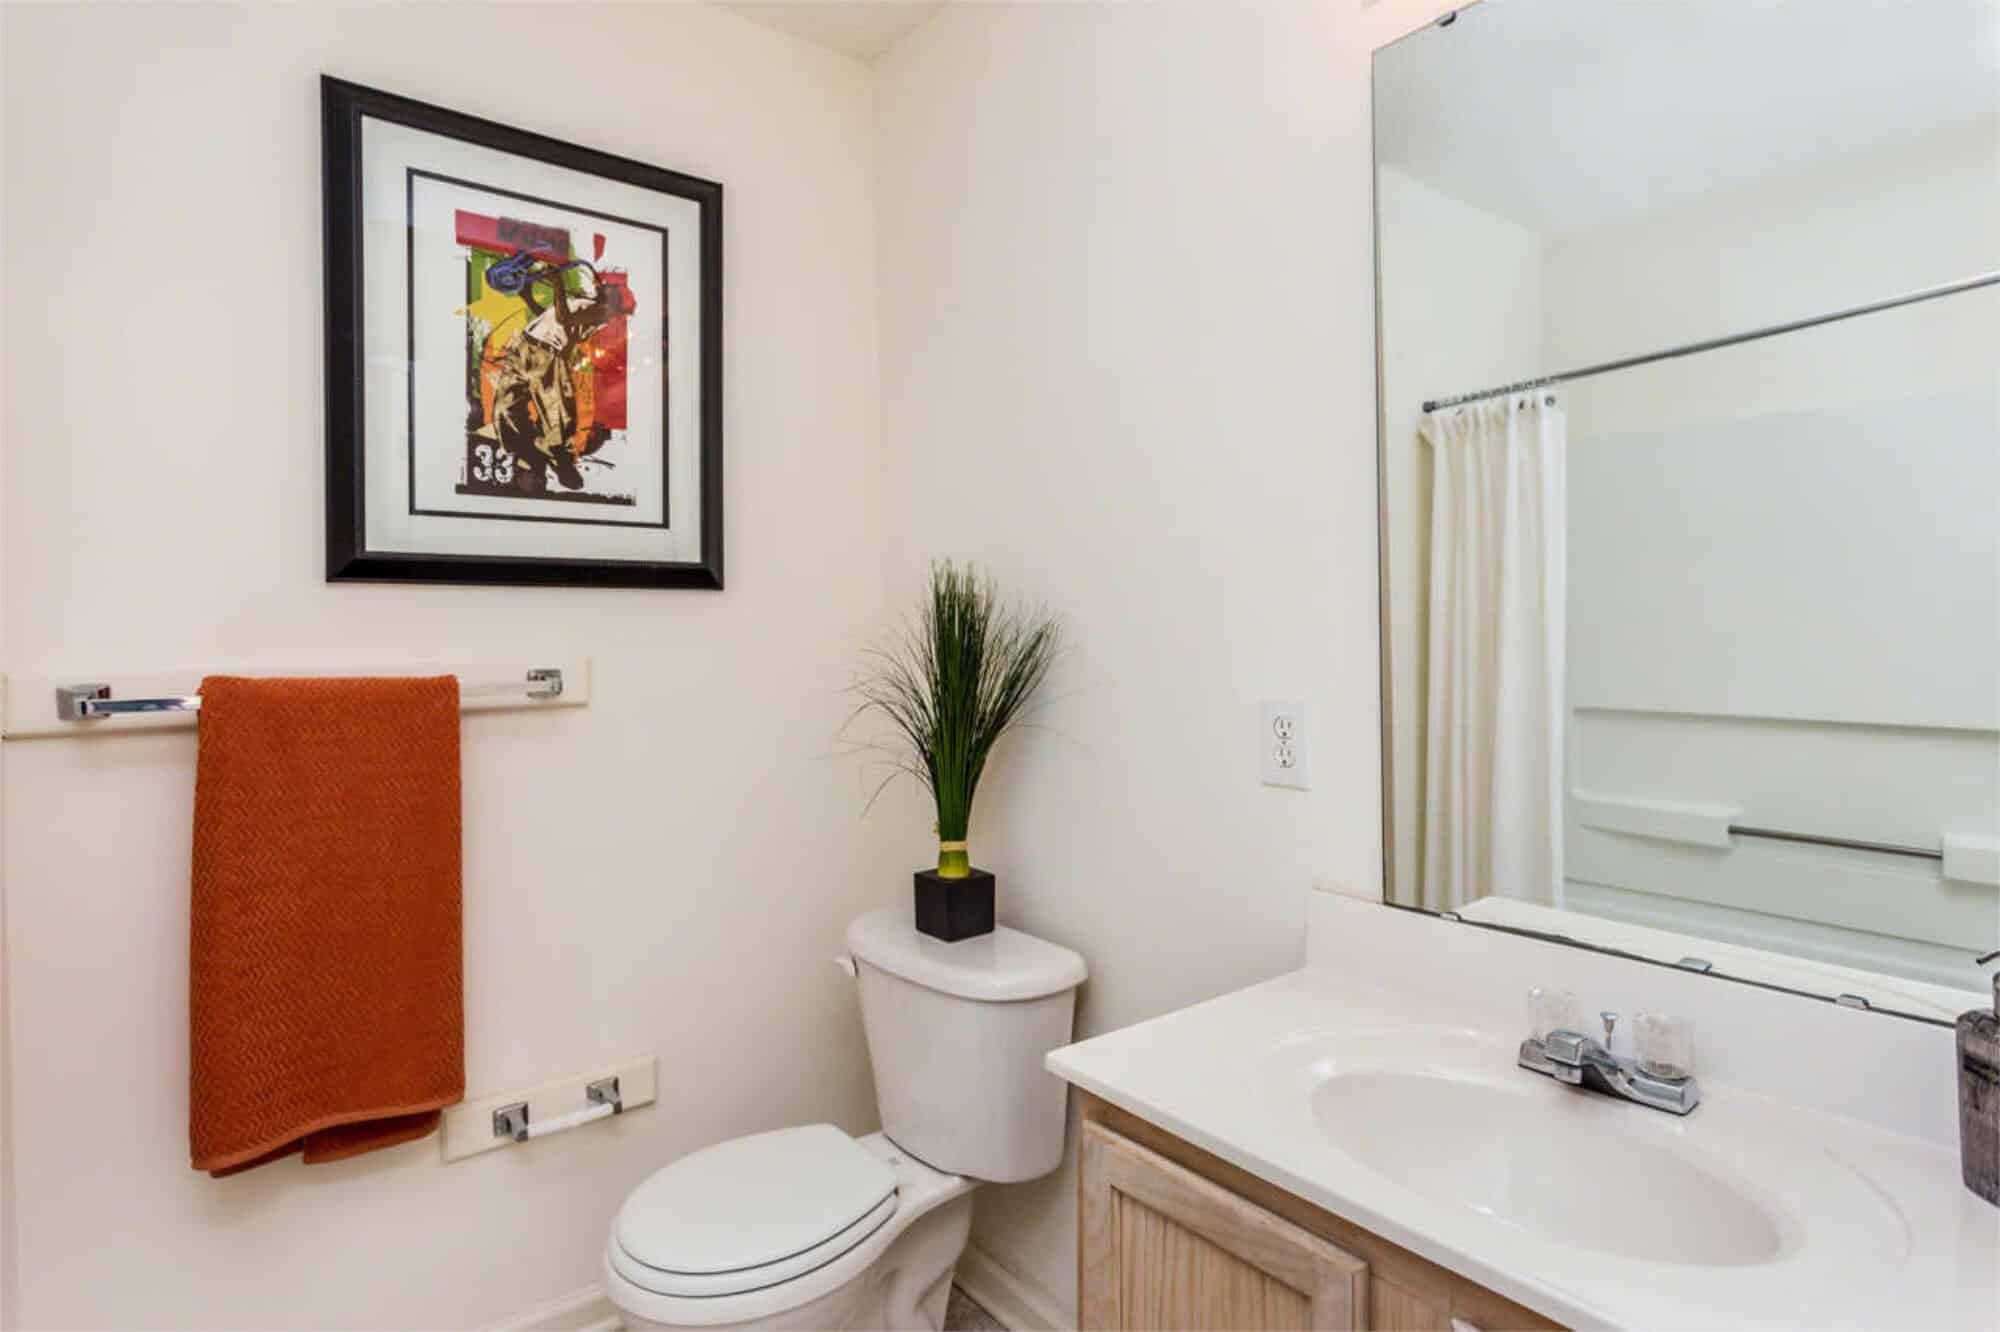 raleigh off campus apartments near nc state university private bathrooms